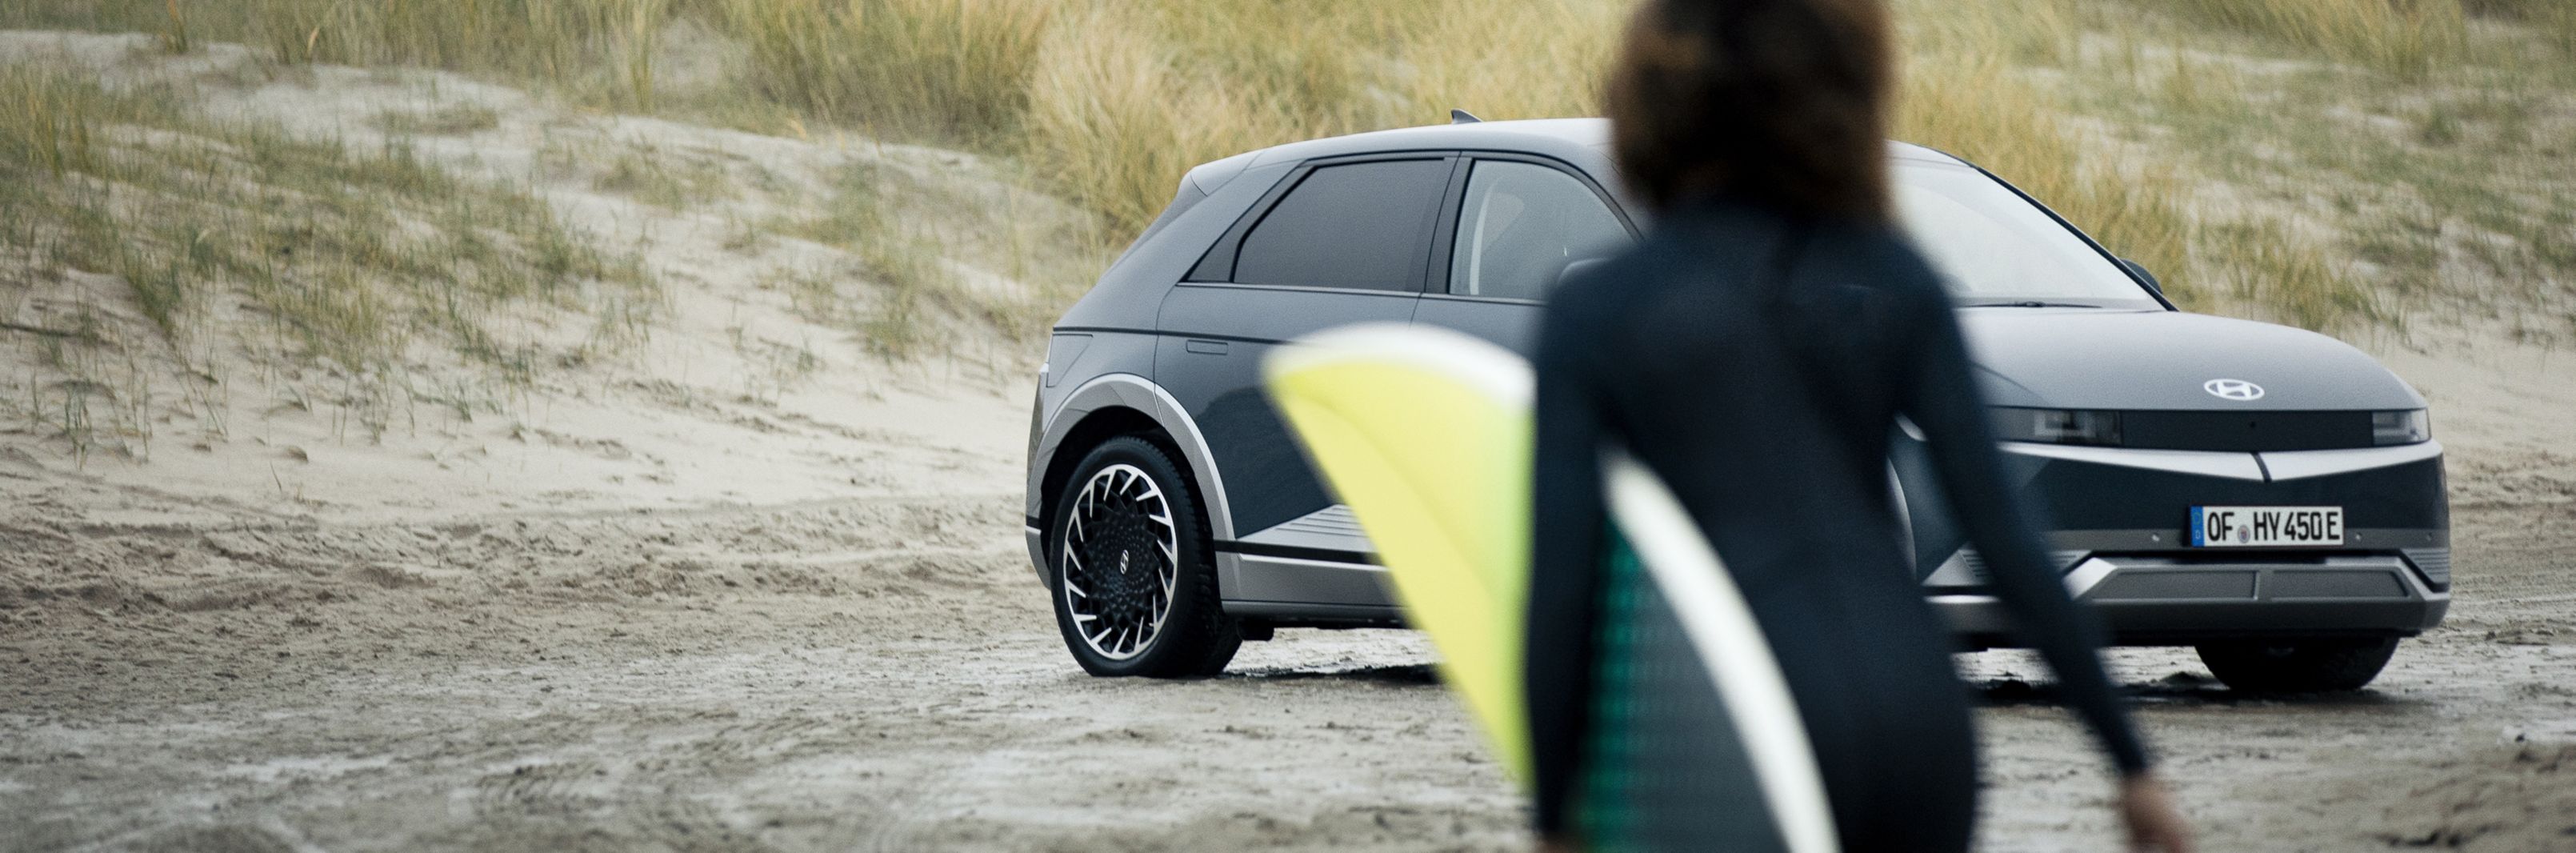 A surfer approaching her Hyundai IONIQ 5 electric vehicle parked on the beach.